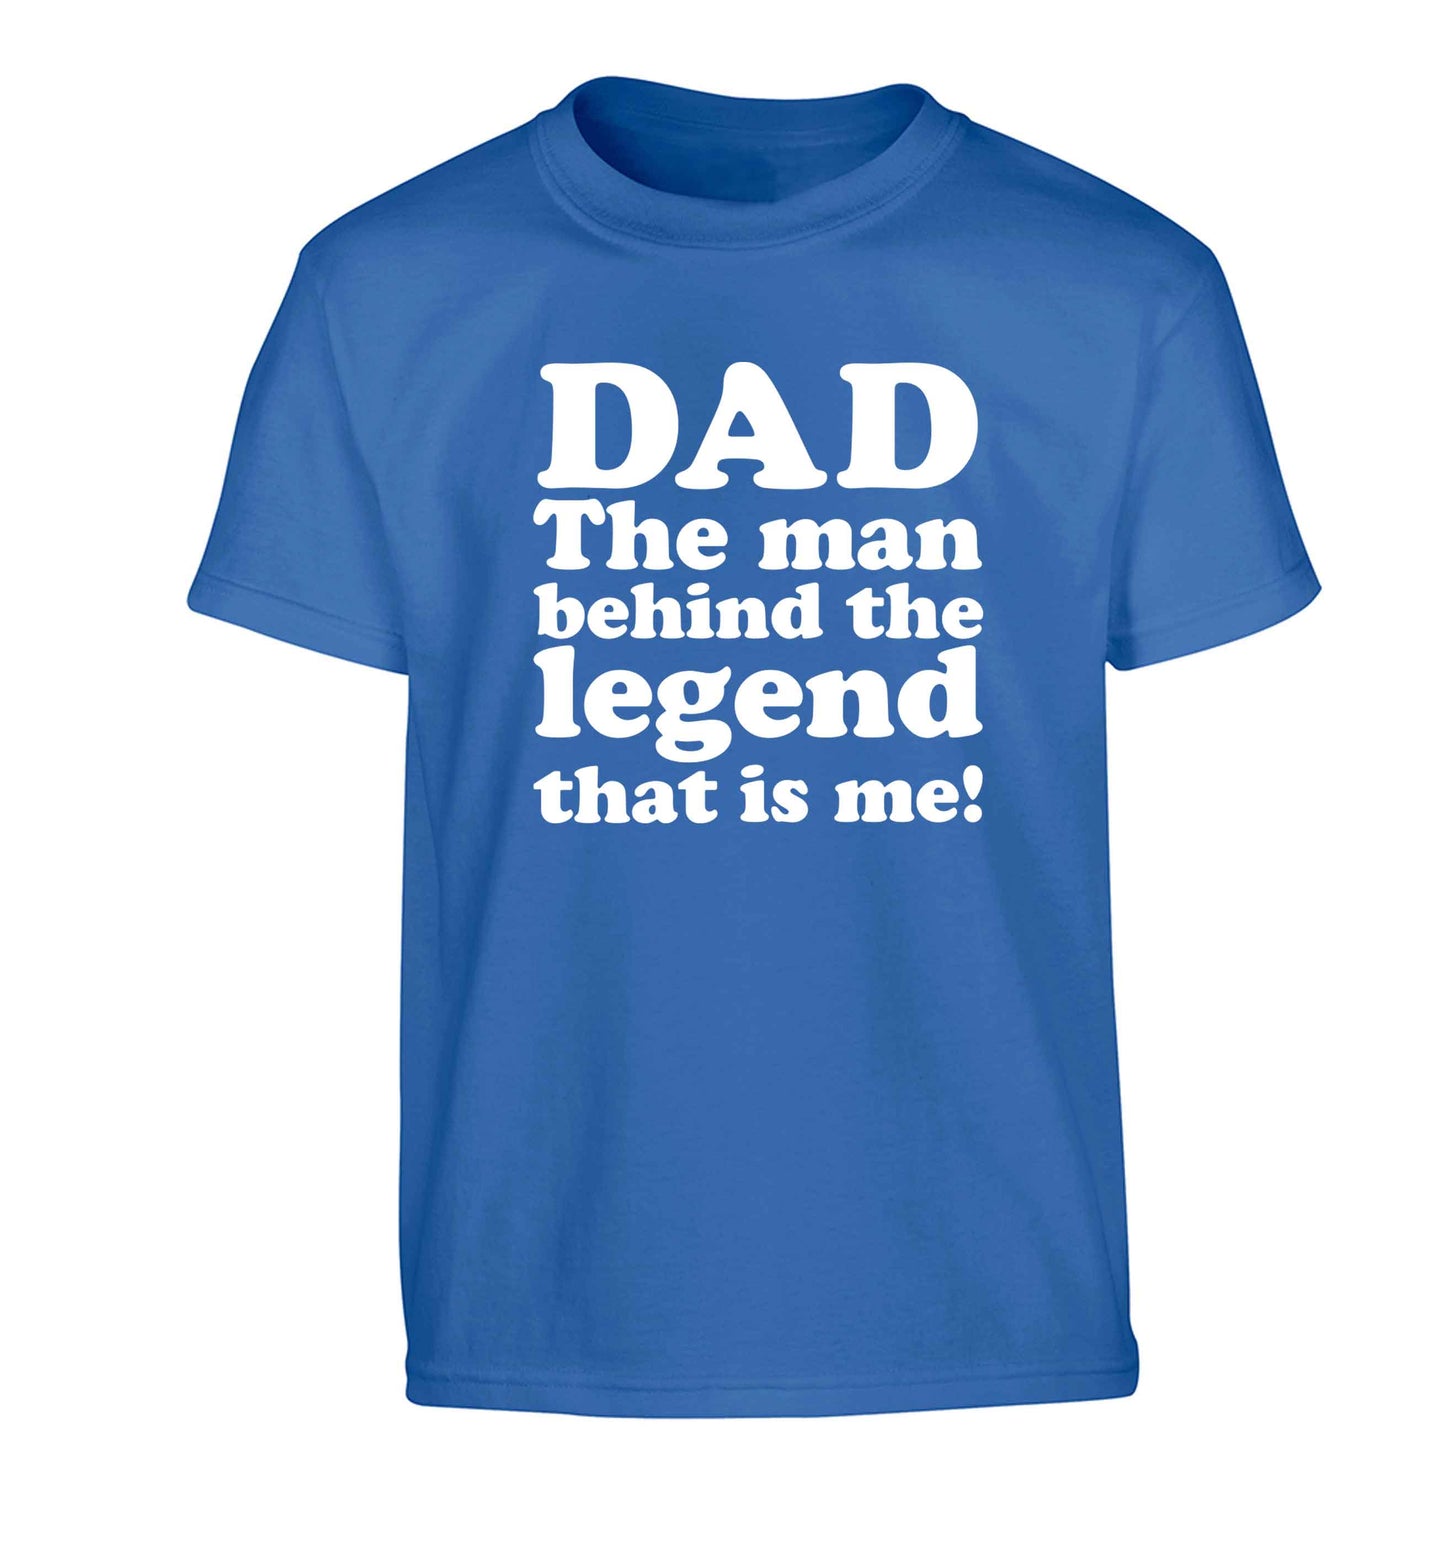 Dad the man behind the legend that is me Children's blue Tshirt 12-13 Years